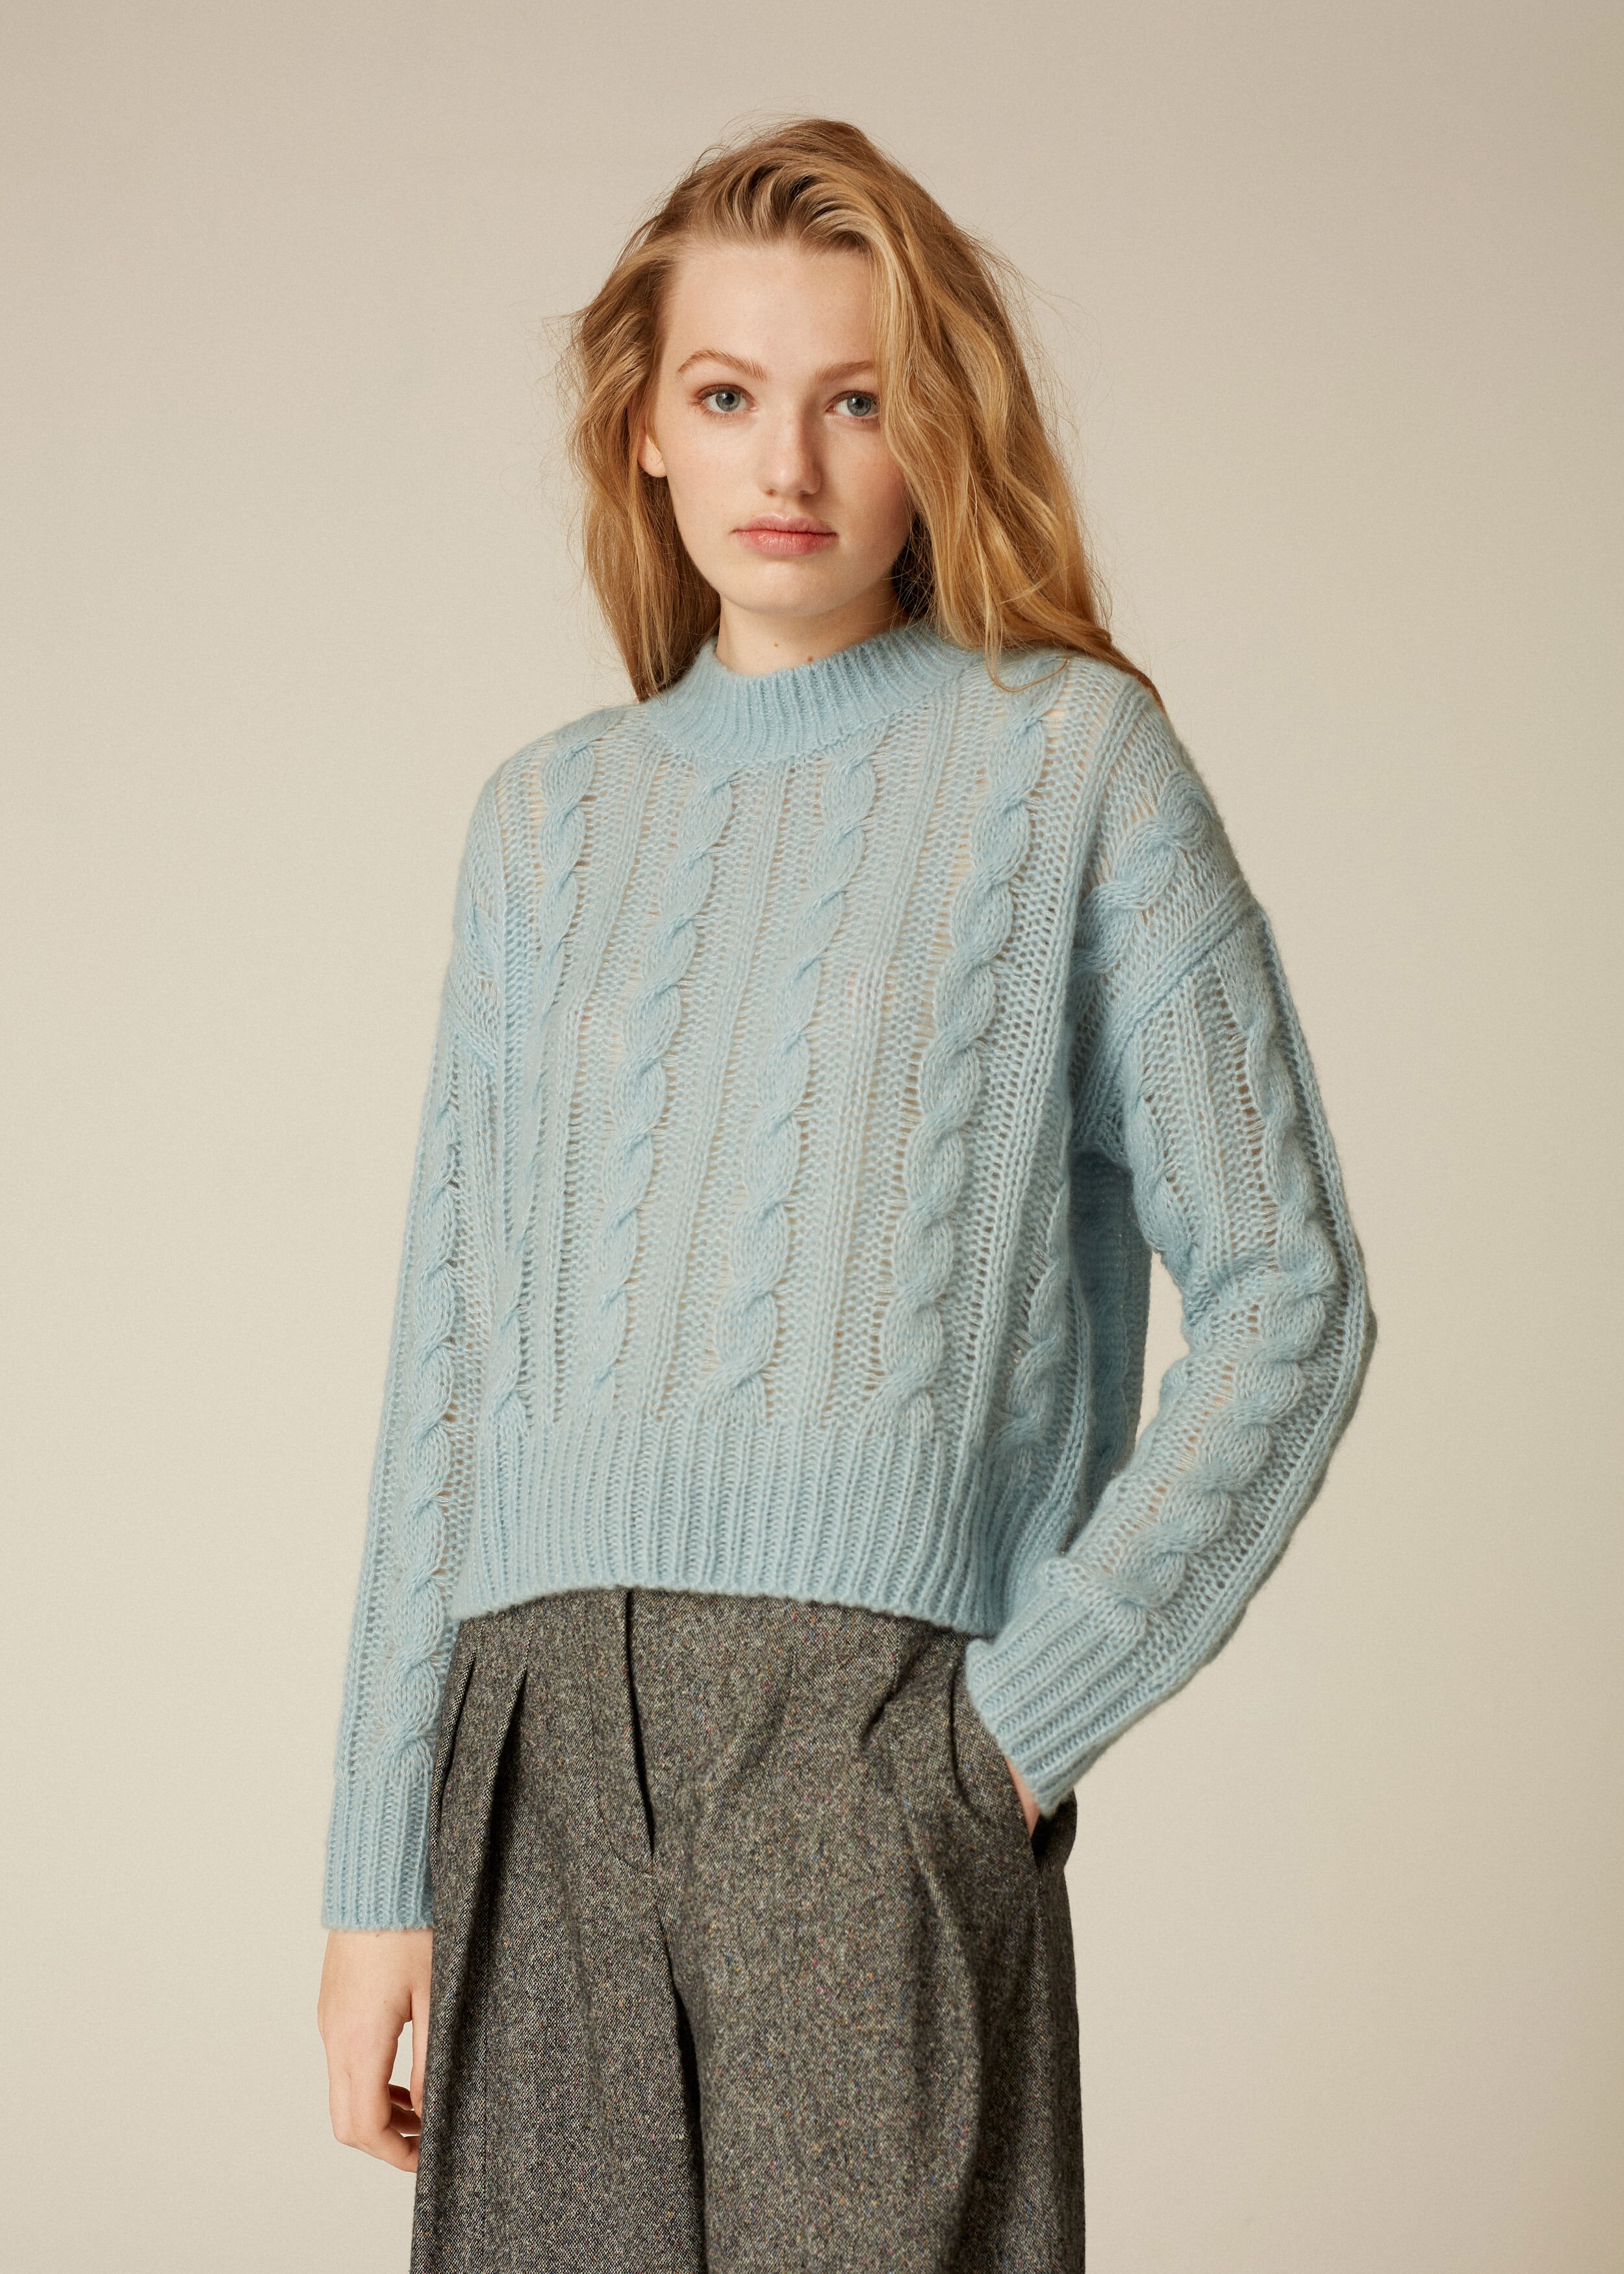 Cashmere Silk Cable Knit Sweater Bright Powder Blue